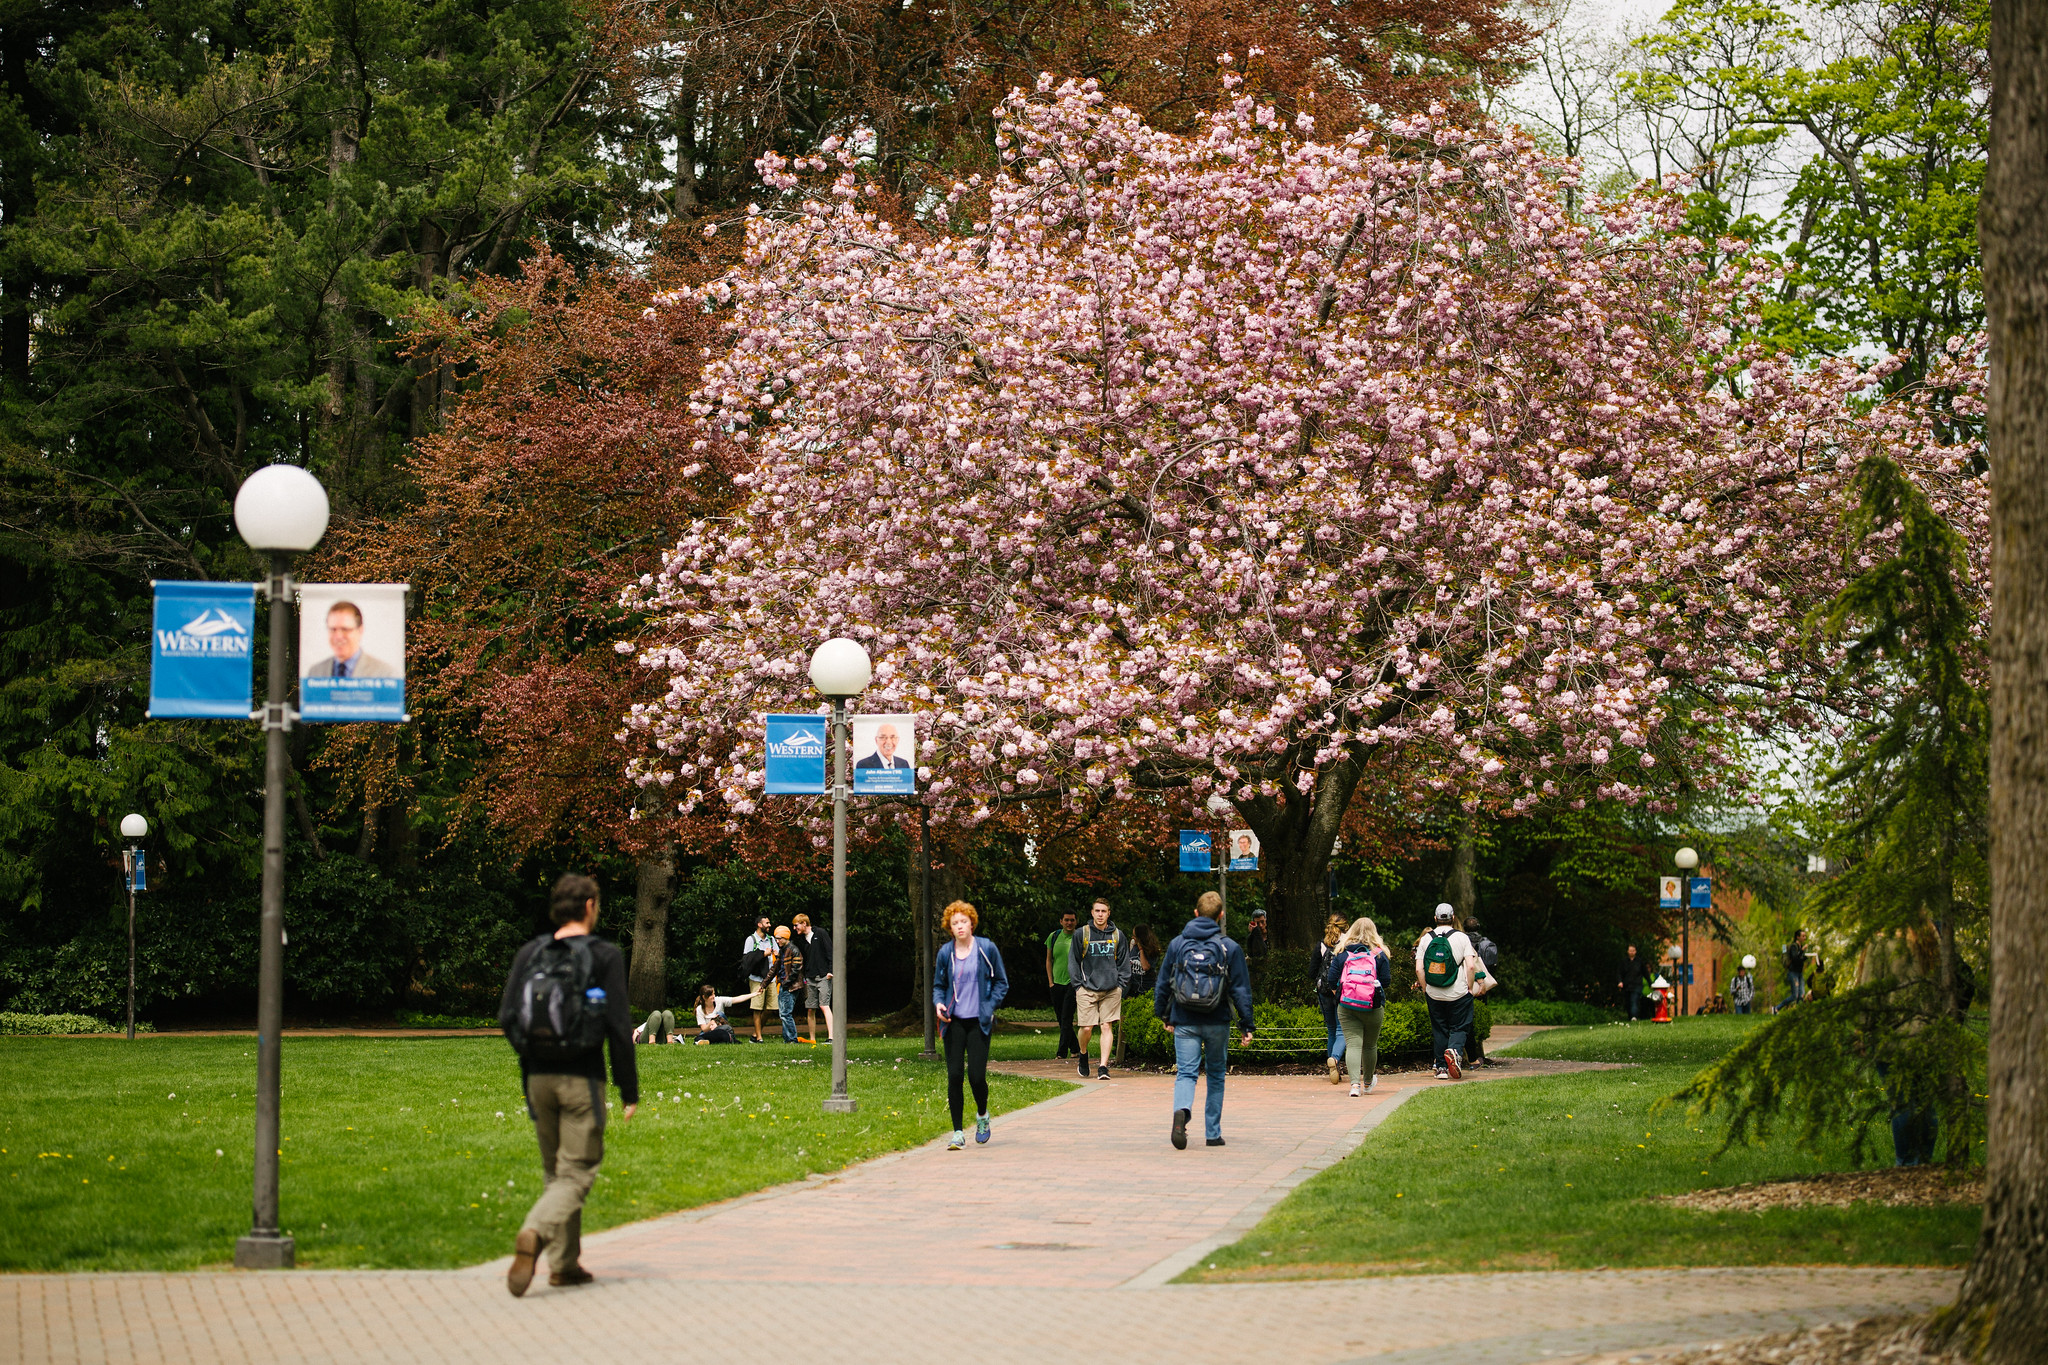 Students walking near Old Main, cherry trees blooming above